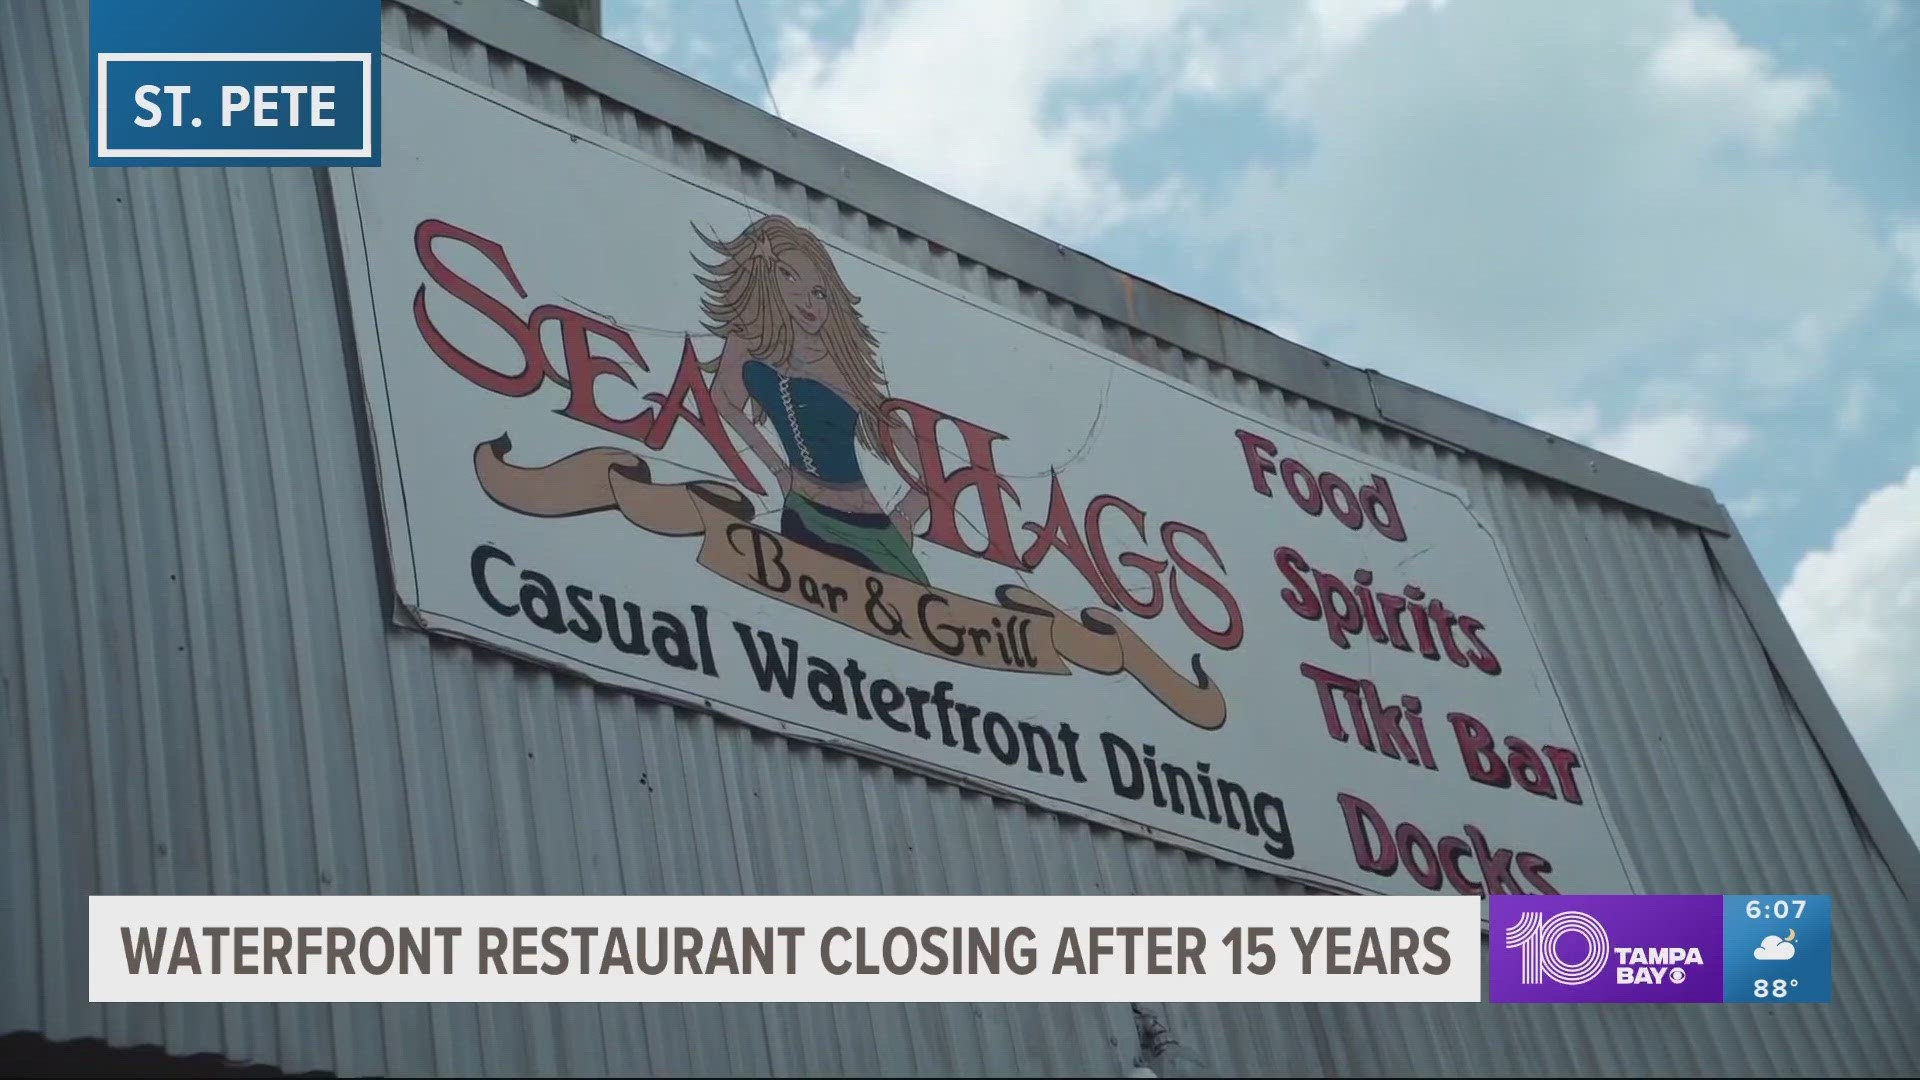 "It's been a great 15 years, and we want to thank you for making us a part of visits to St. Pete Beach," the restaurant wrote.